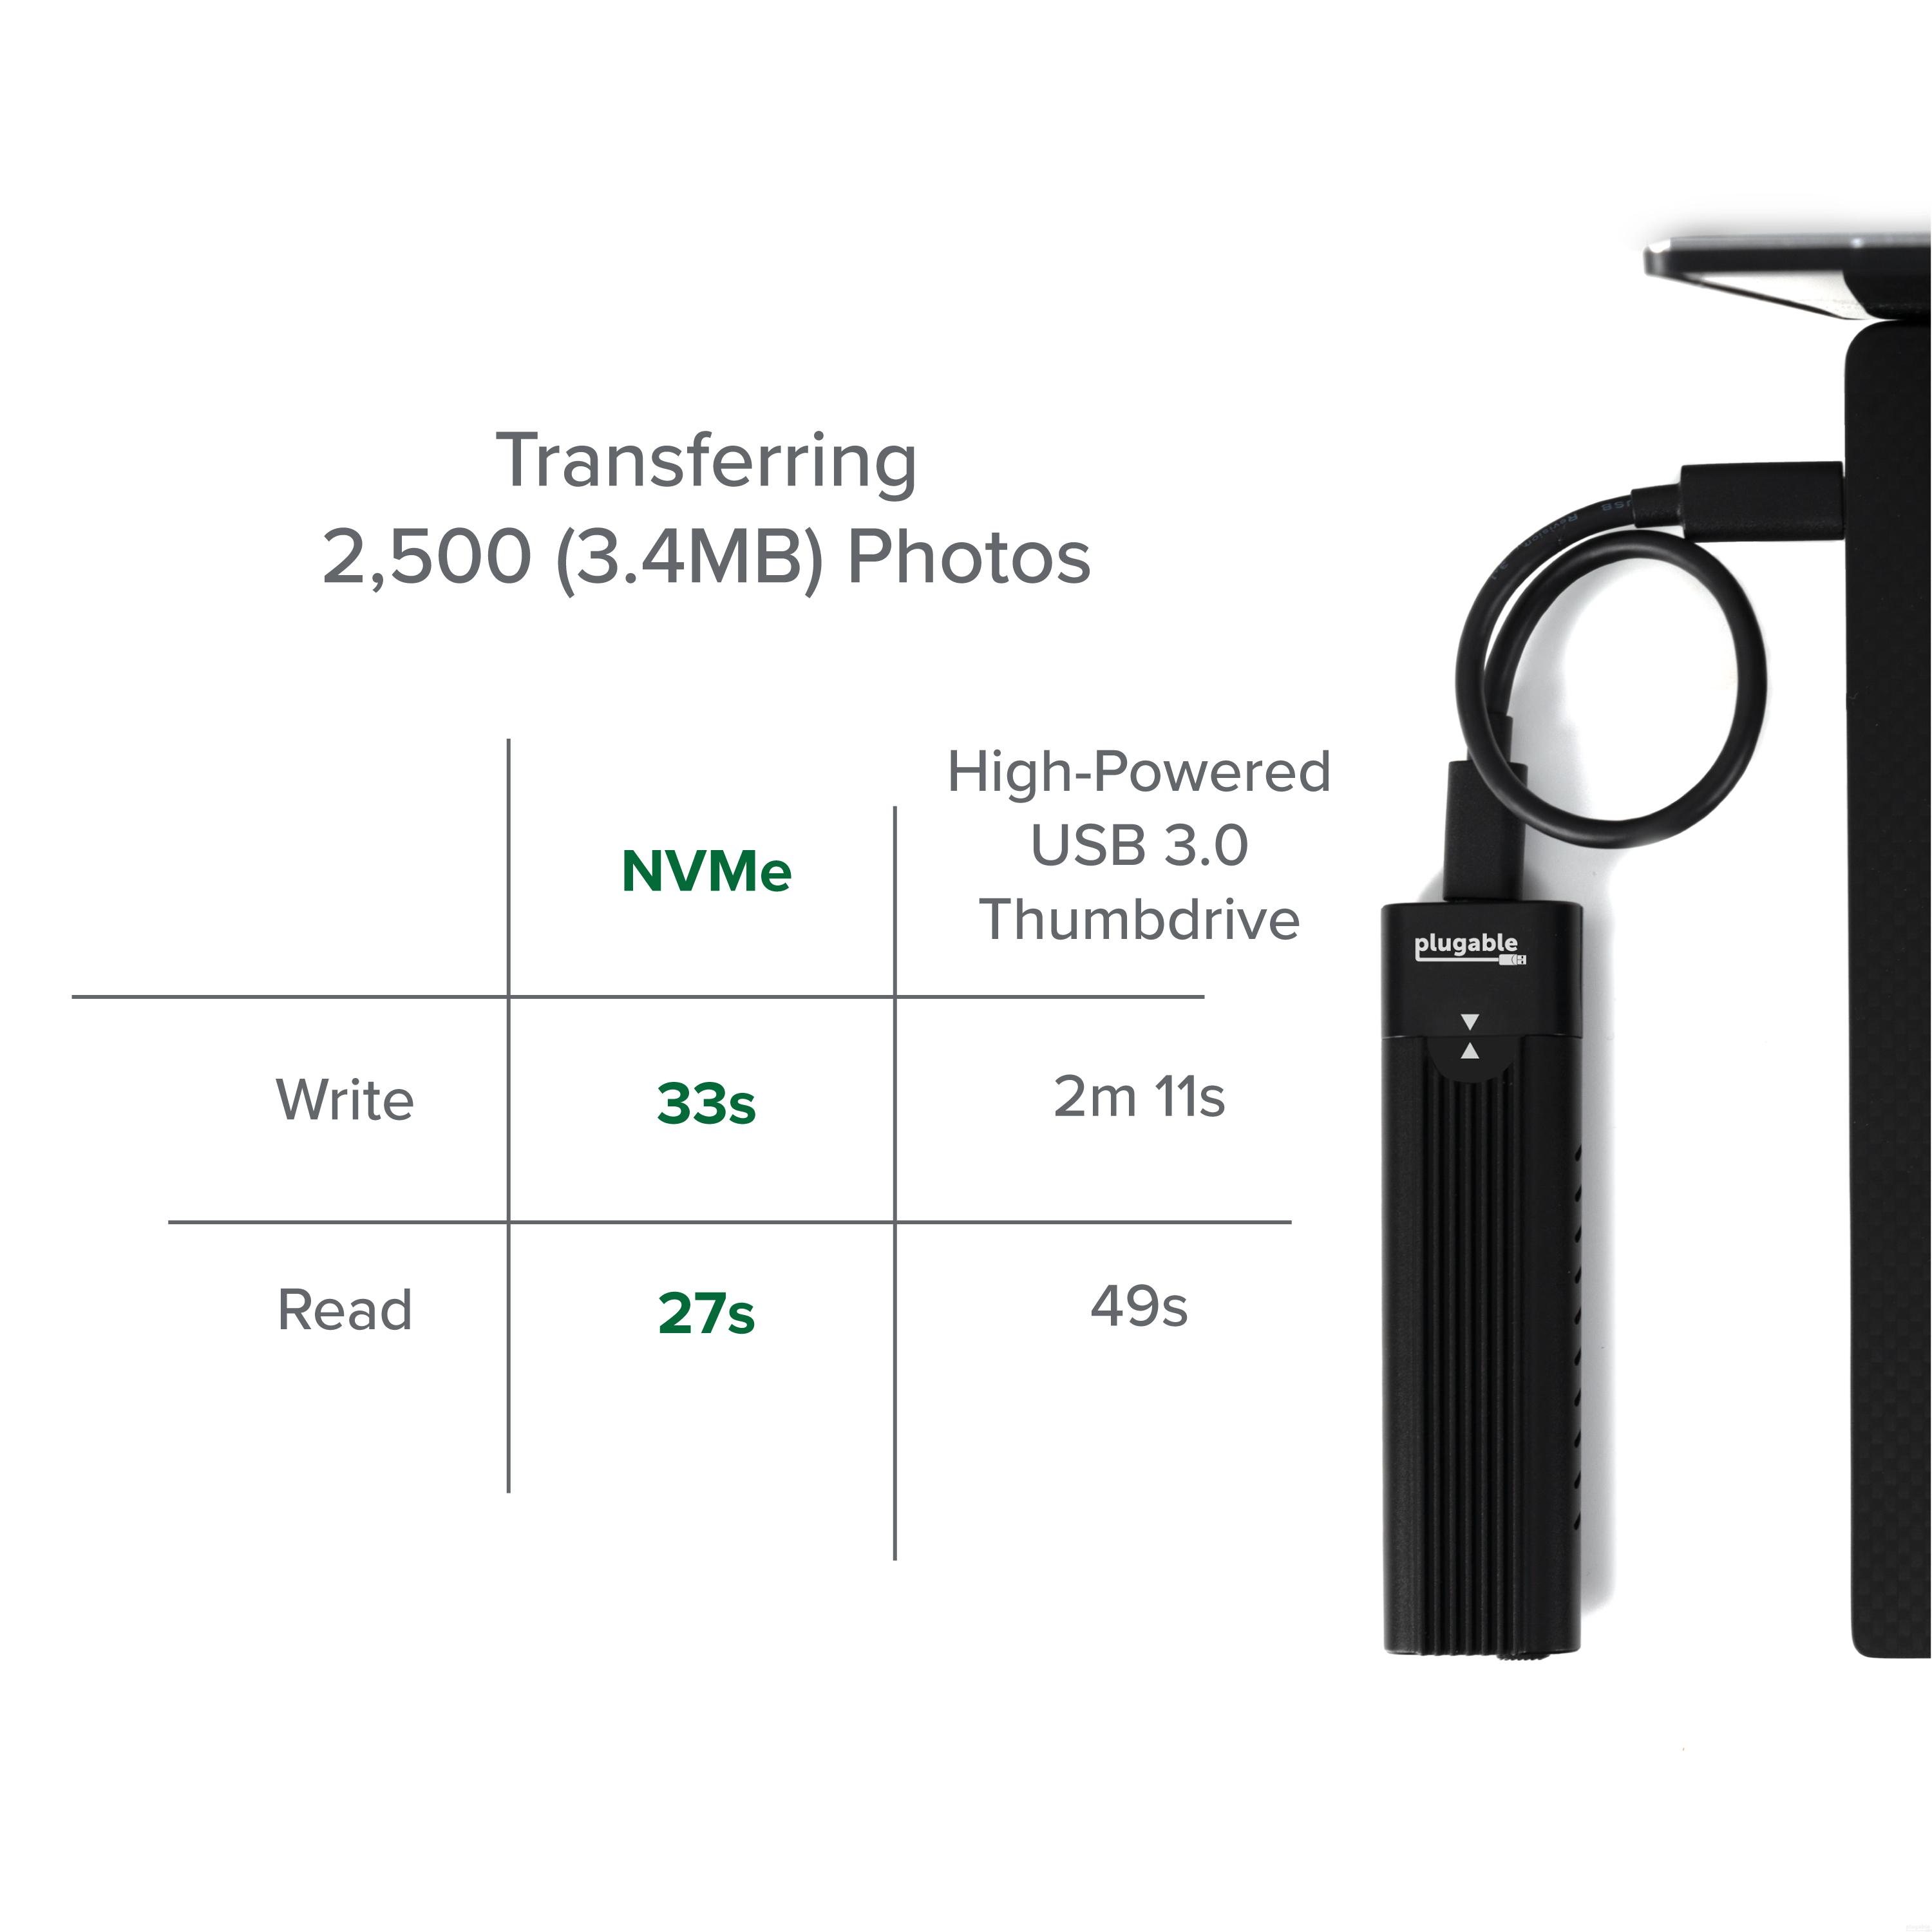 Plugable USB C to M.2 NVMe Tool-free Enclosure USB C and Thunderbolt 3 Compatible up to USB 3.1 Gen 2 Speeds (10Gbps). Adapter Includes USB-C and USB 3.0 Cables (Supports M.2 NVMe SSDs 2280 2260 2242) - image 5 of 8